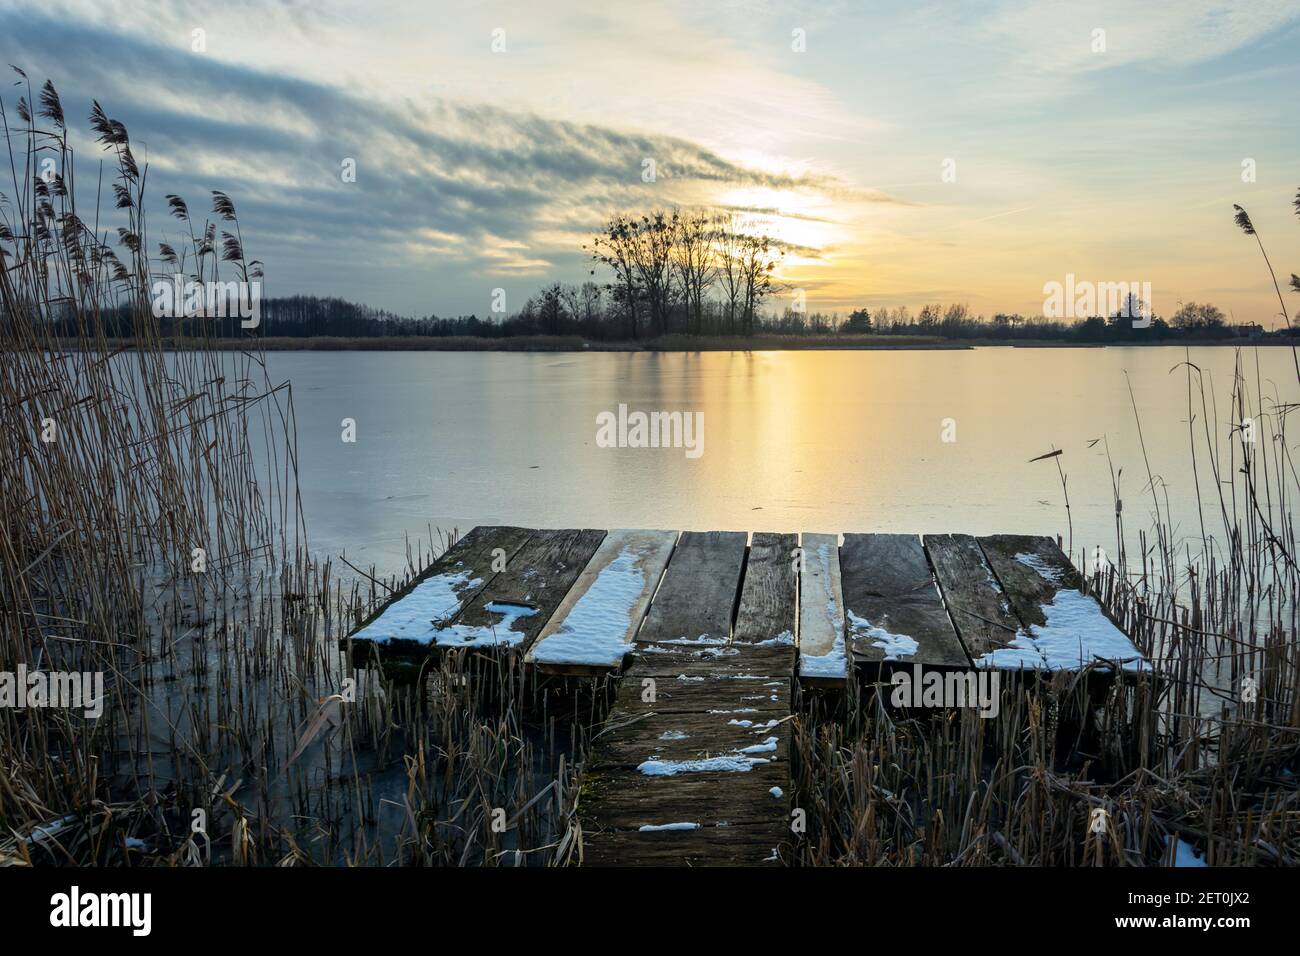 A fishing platform in the reeds and sunset over a calm lake, winter landscape, Stankow, Lubelskie, Poland Stock Photo